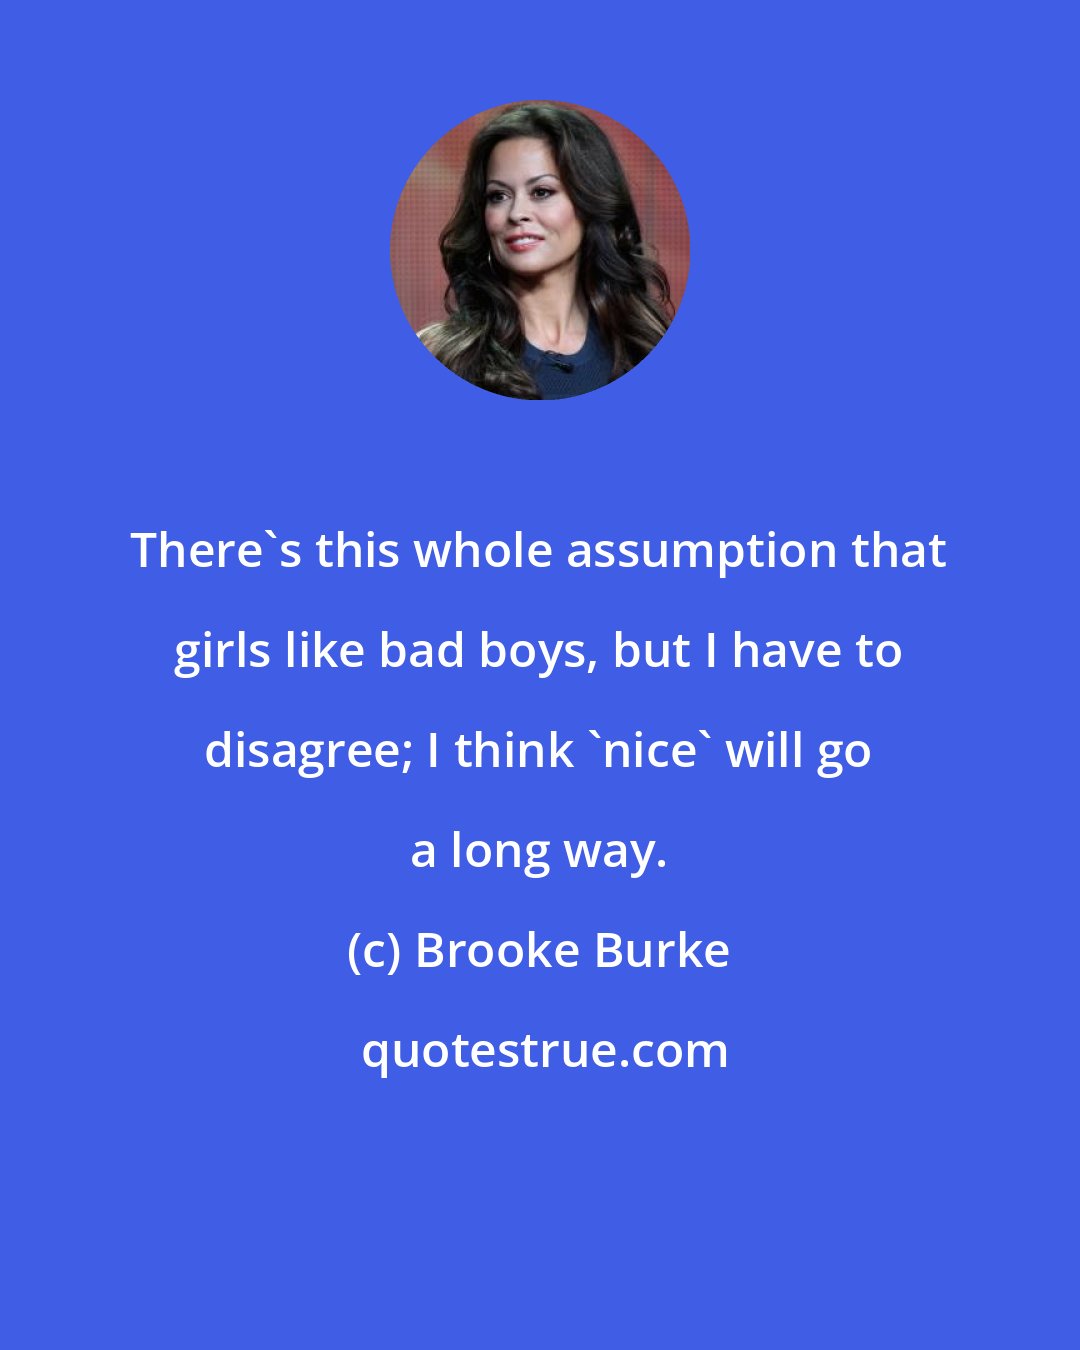 Brooke Burke: There's this whole assumption that girls like bad boys, but I have to disagree; I think 'nice' will go a long way.